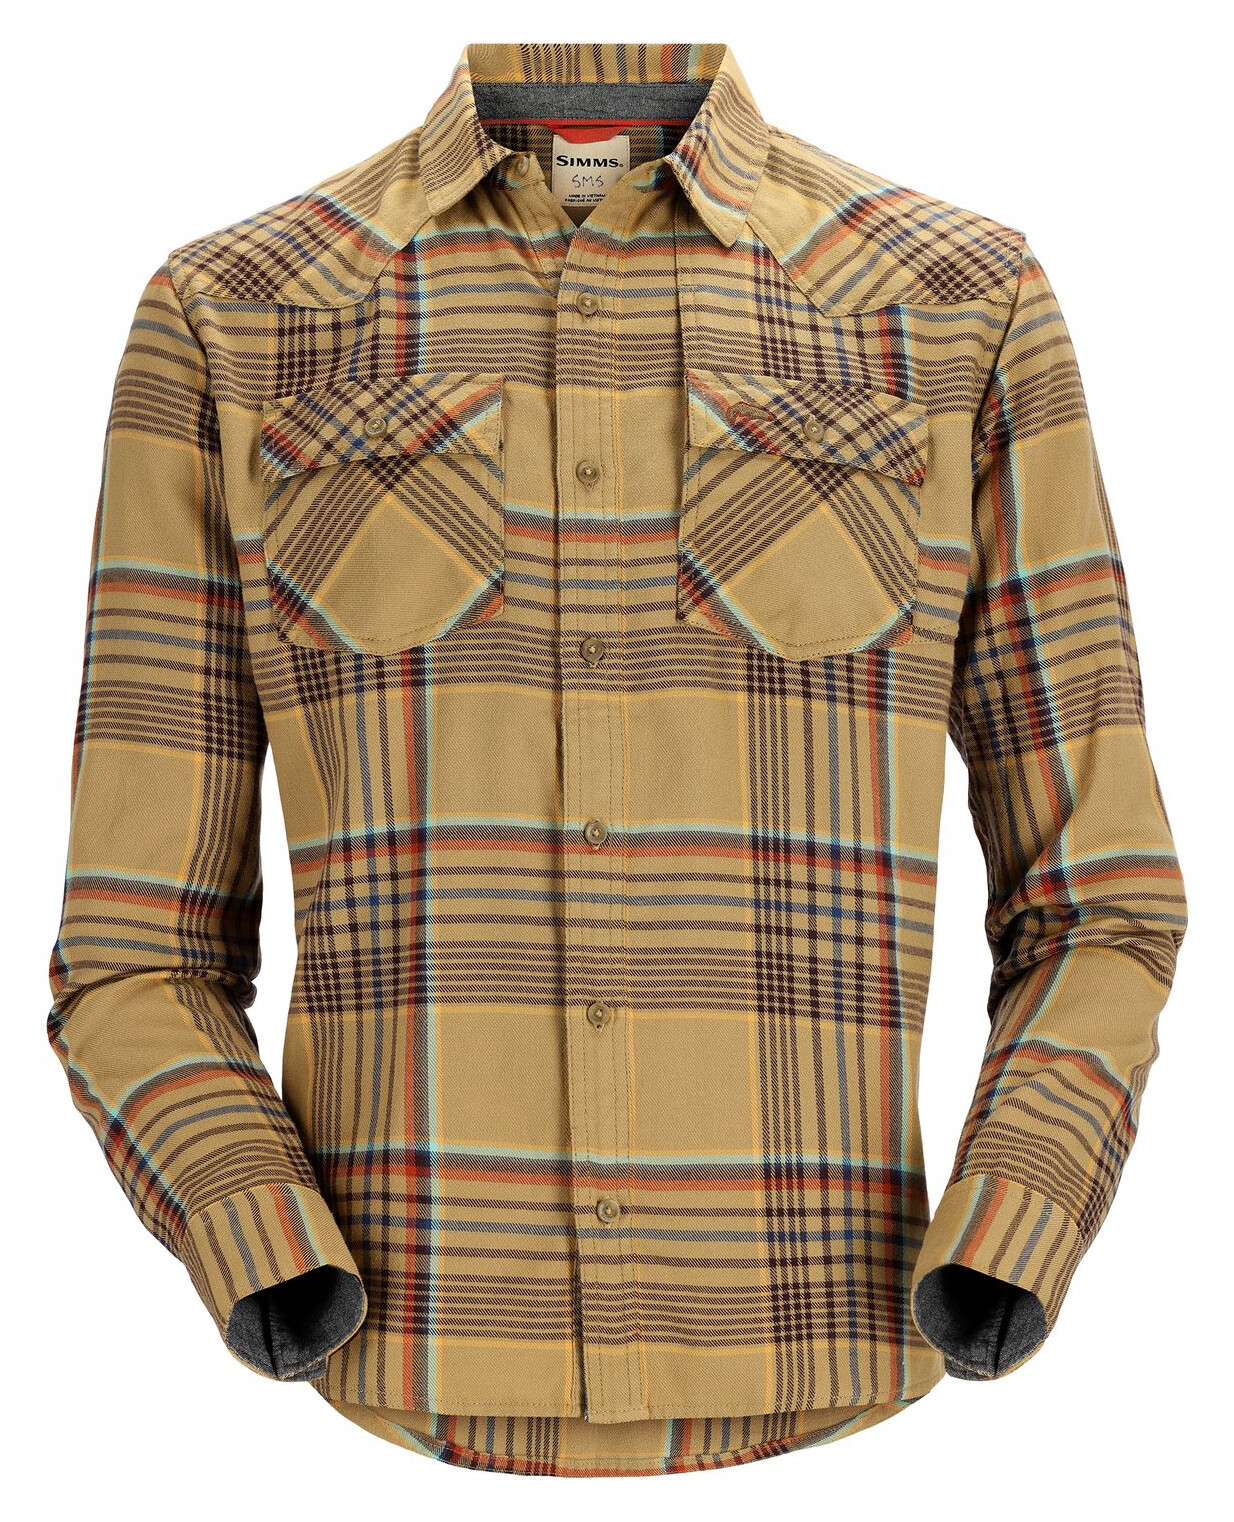 https://www.czechnymph.com/data/web/auto-imported-products/simms/simms-santee-flannel-a0a438d0.jpg